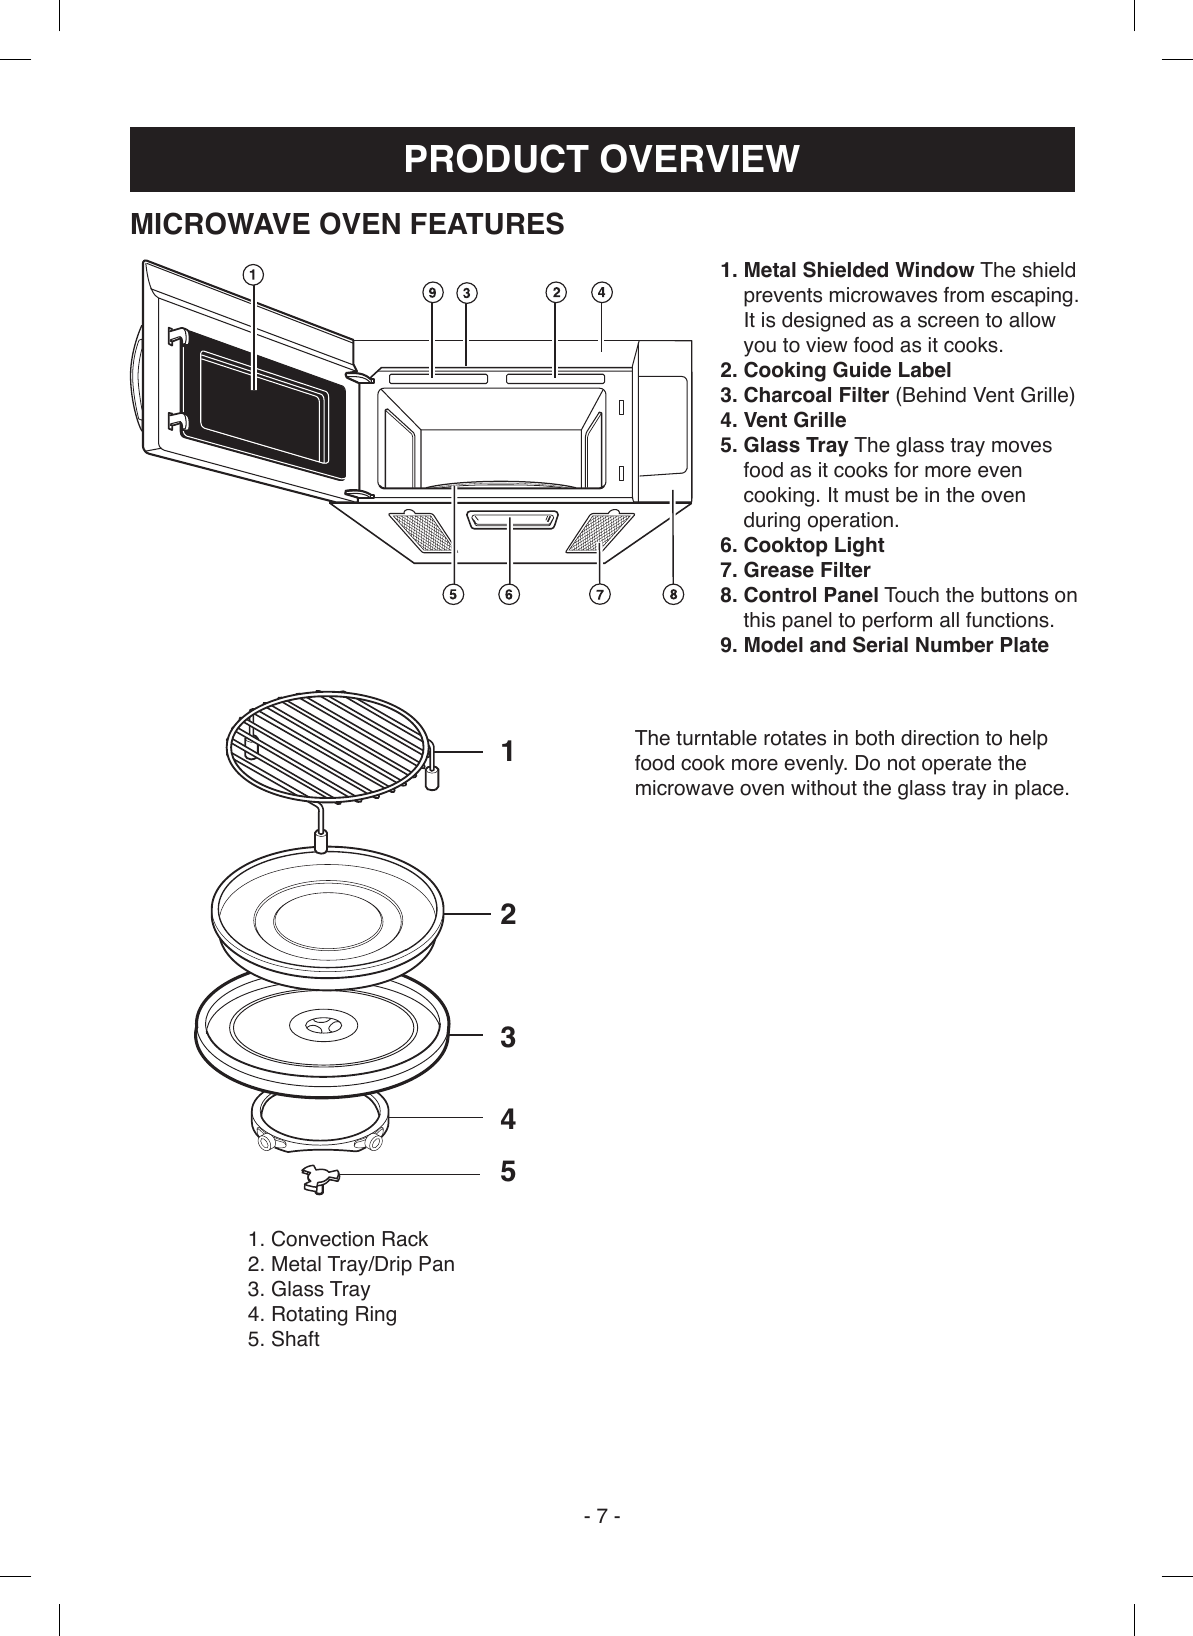 - 7 -MICROWAVE OVEN FEATURESPRODUCT OVERVIEW1.  Metal Shielded Window The shield  prevents microwaves from escaping.  It is designed as a screen to allow  you to view food as it cooks.2. Cooking Guide Label3. Charcoal Filter (Behind Vent Grille)4. Vent Grille5.  Glass Tray The glass tray moves  food as it cooks for more even  cooking. It must be in the oven  during operation.6. Cooktop Light7. Grease Filter8.  Control Panel Touch the buttons on  this panel to perform all functions.9. Model and Serial Number Plate12345The turntable rotates in both direction to help food cook more evenly. Do not operate the microwave oven without the glass tray in place.1. Convection Rack2. Metal Tray/Drip Pan3. Glass Tray4. Rotating Ring5. Shaft